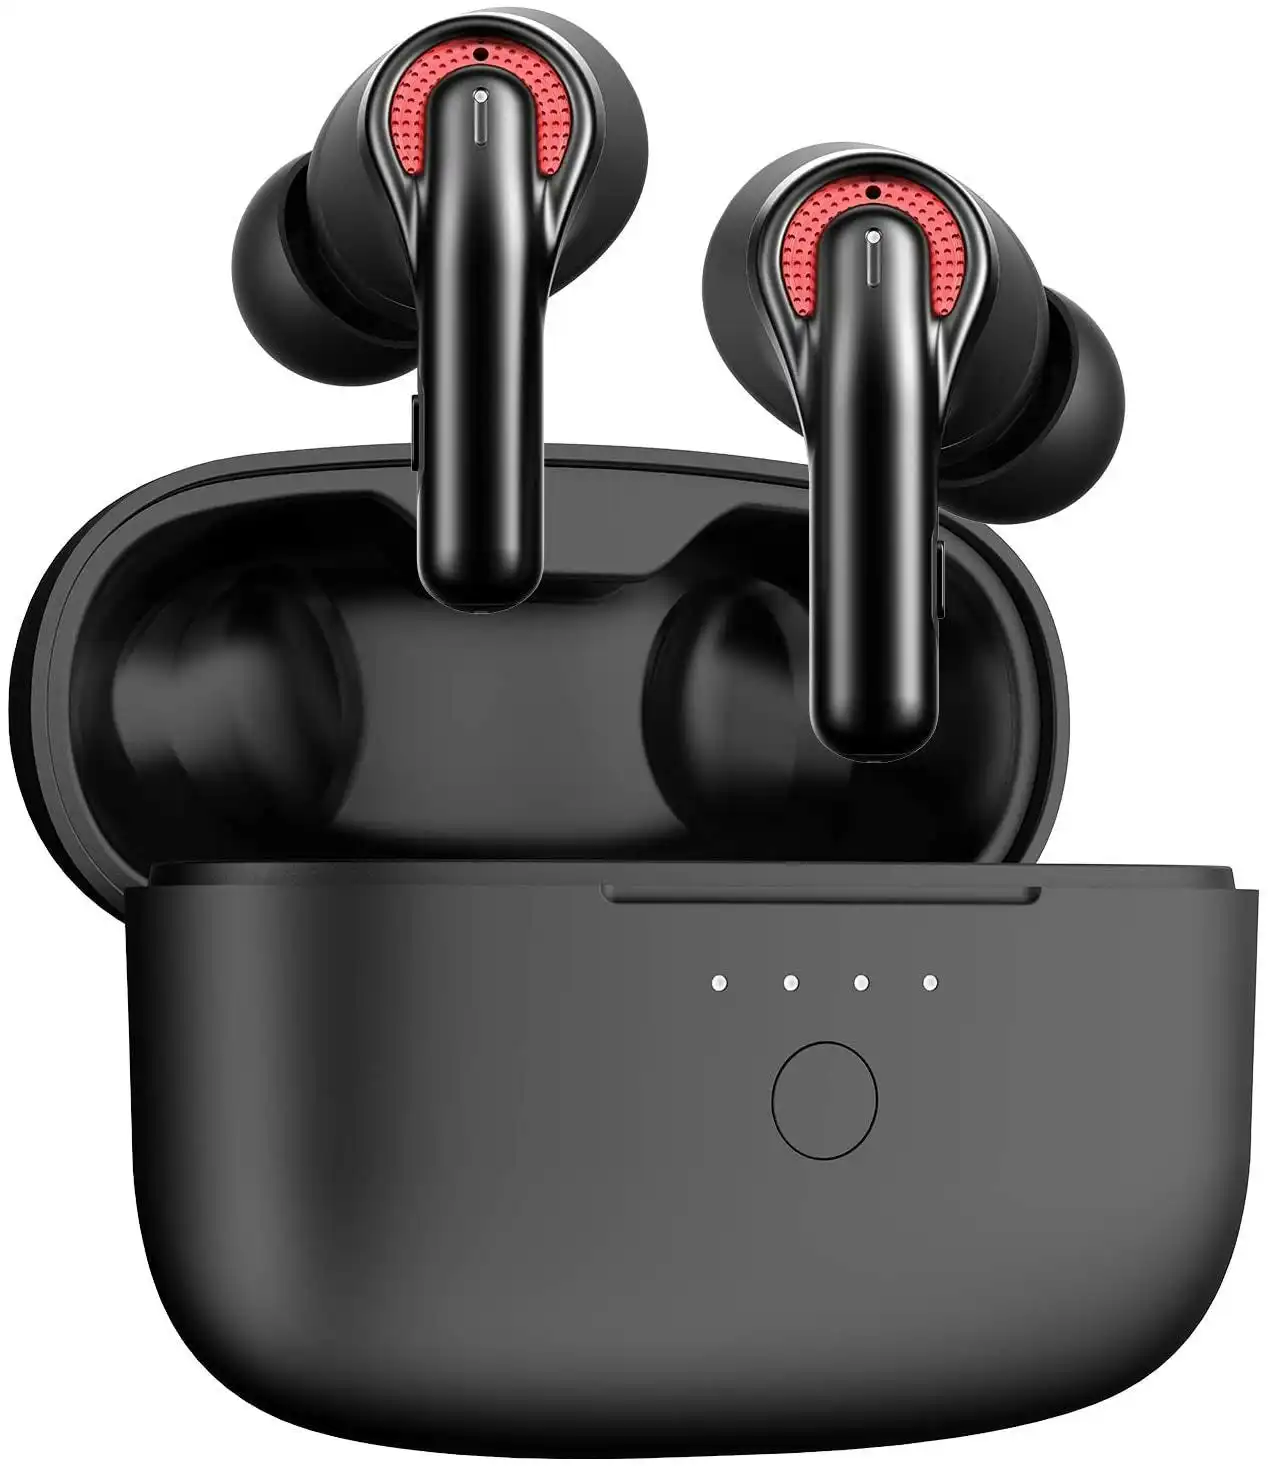 Tribit Wireless Earbuds Qualcomm QCC3040 Bluetooth 5.2, 4 Mics CVC 8.0 Call Noise Reduction 50H Playtime Clear Calls Volume Control True Wireless Blue